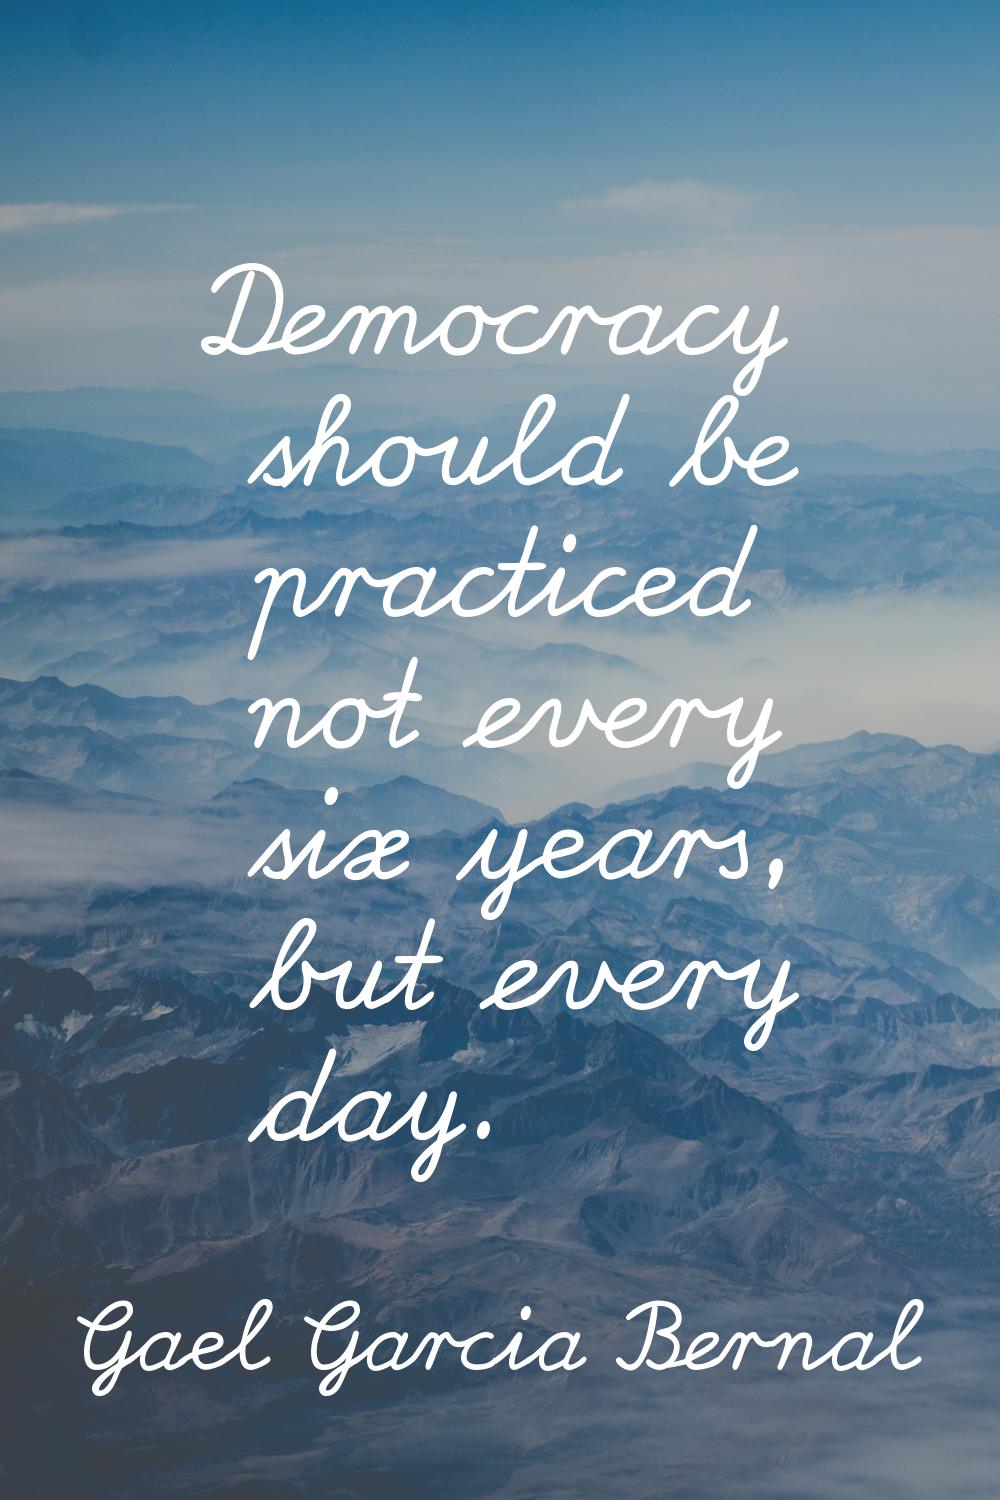 Democracy should be practiced not every six years, but every day.